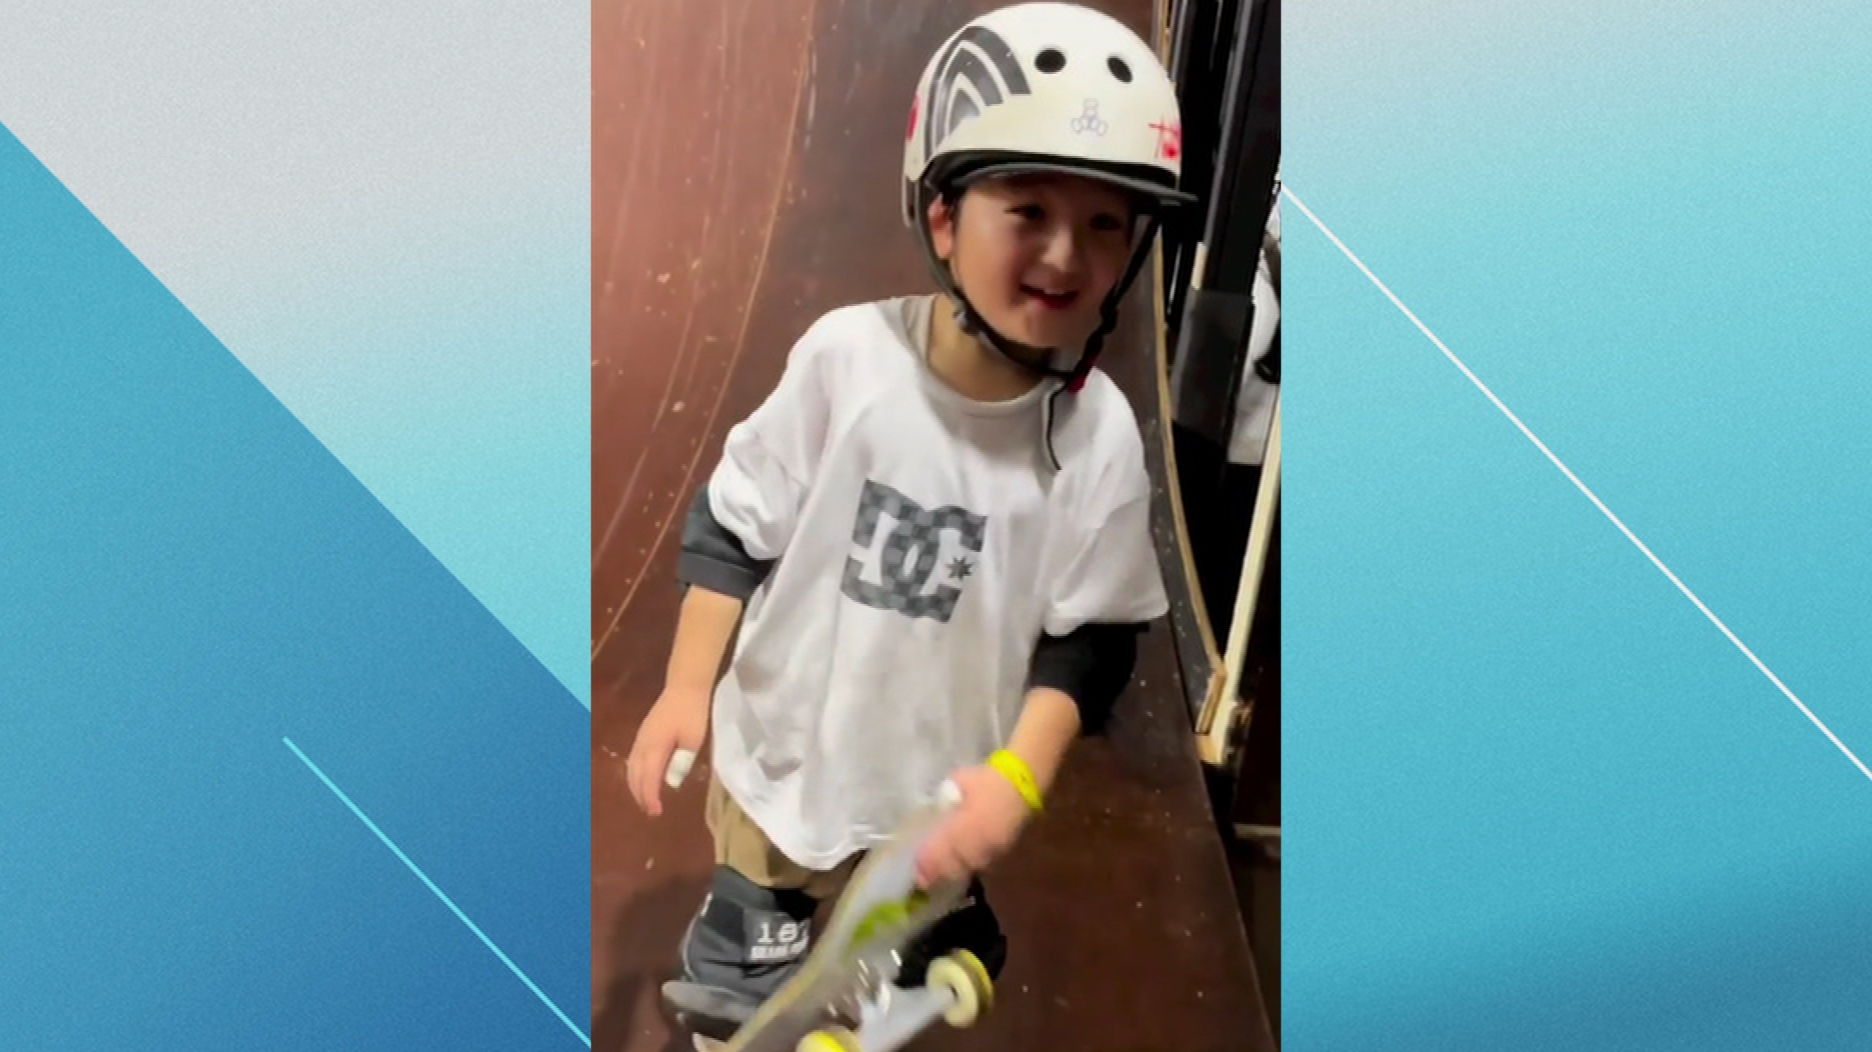 7-year-old skateboarder lands the 900